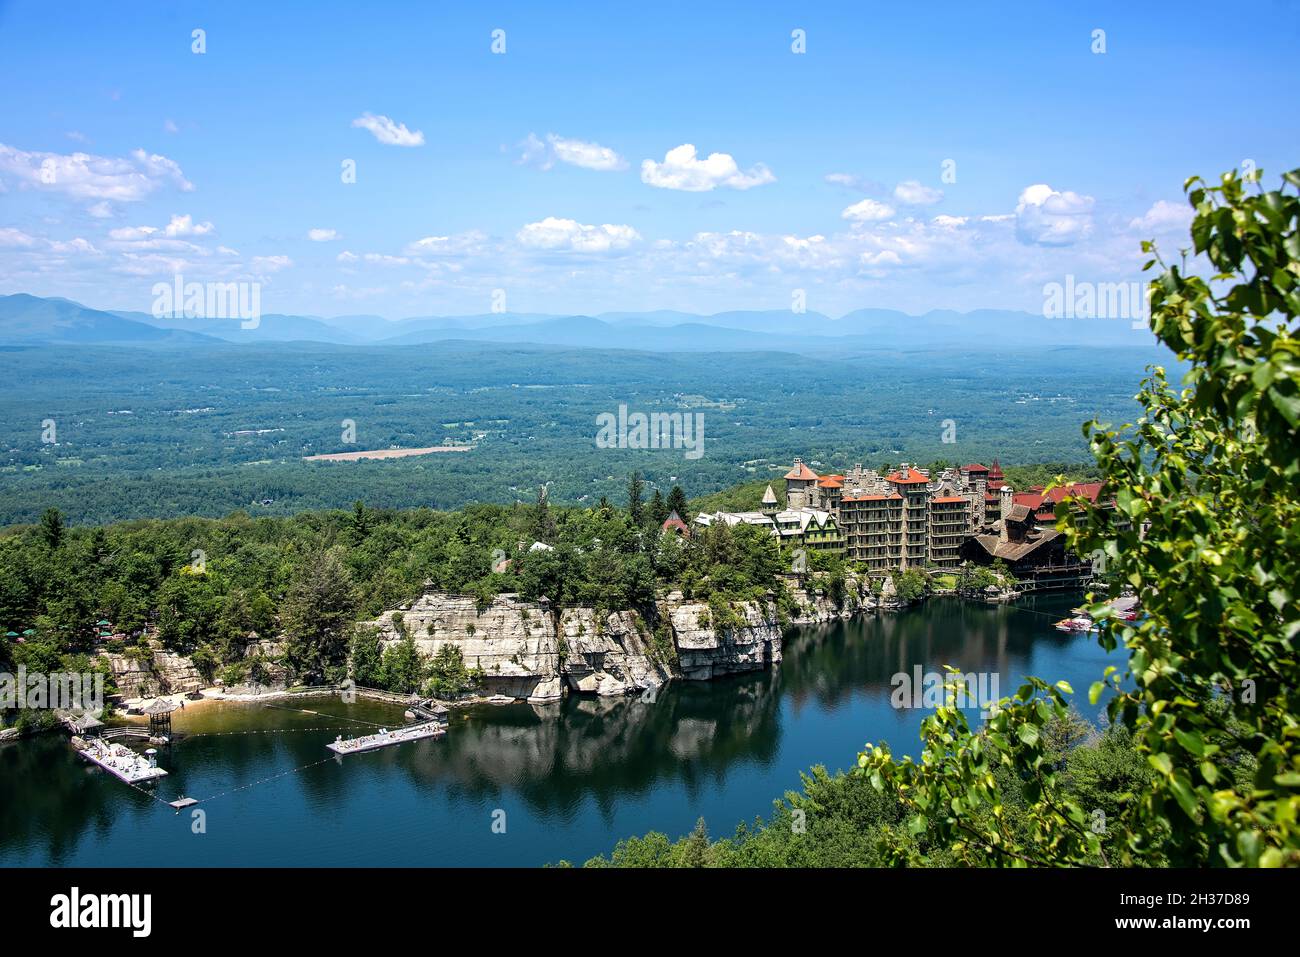 Scenic view of Mohonk Mountain House and Mohonk Lake, located in New Paltz, upstate New York. Stock Photo